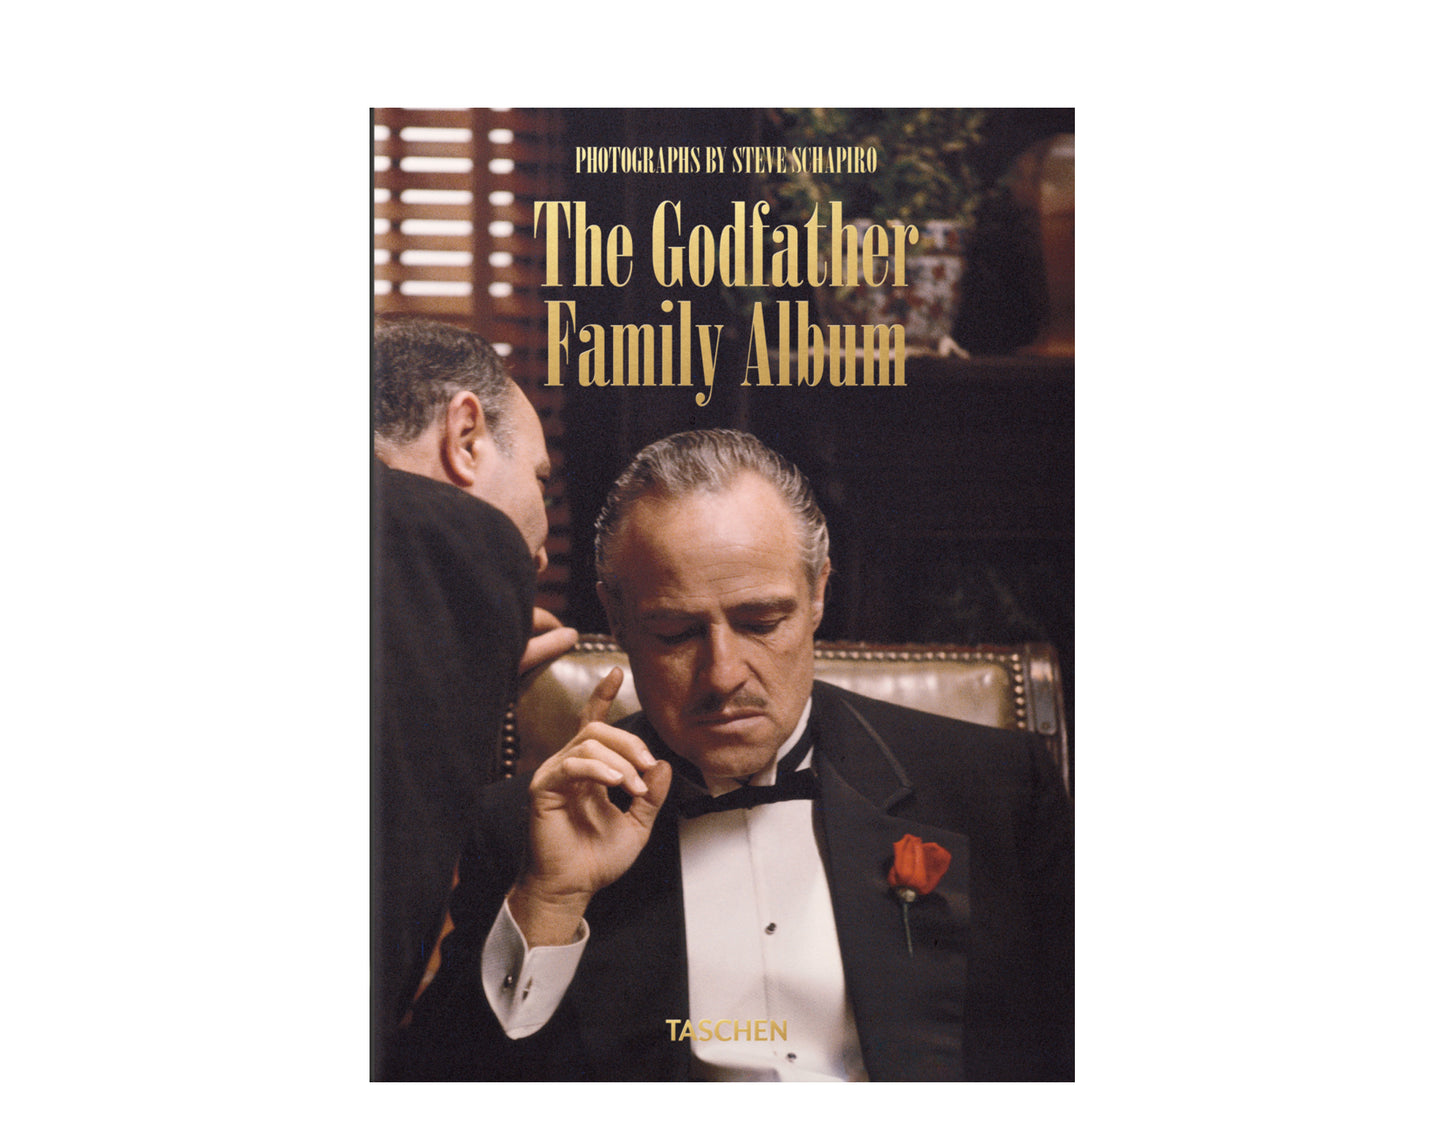 Taschen Books - The Godfather Family Album - 40th Anniversary Edition Hardcover Book